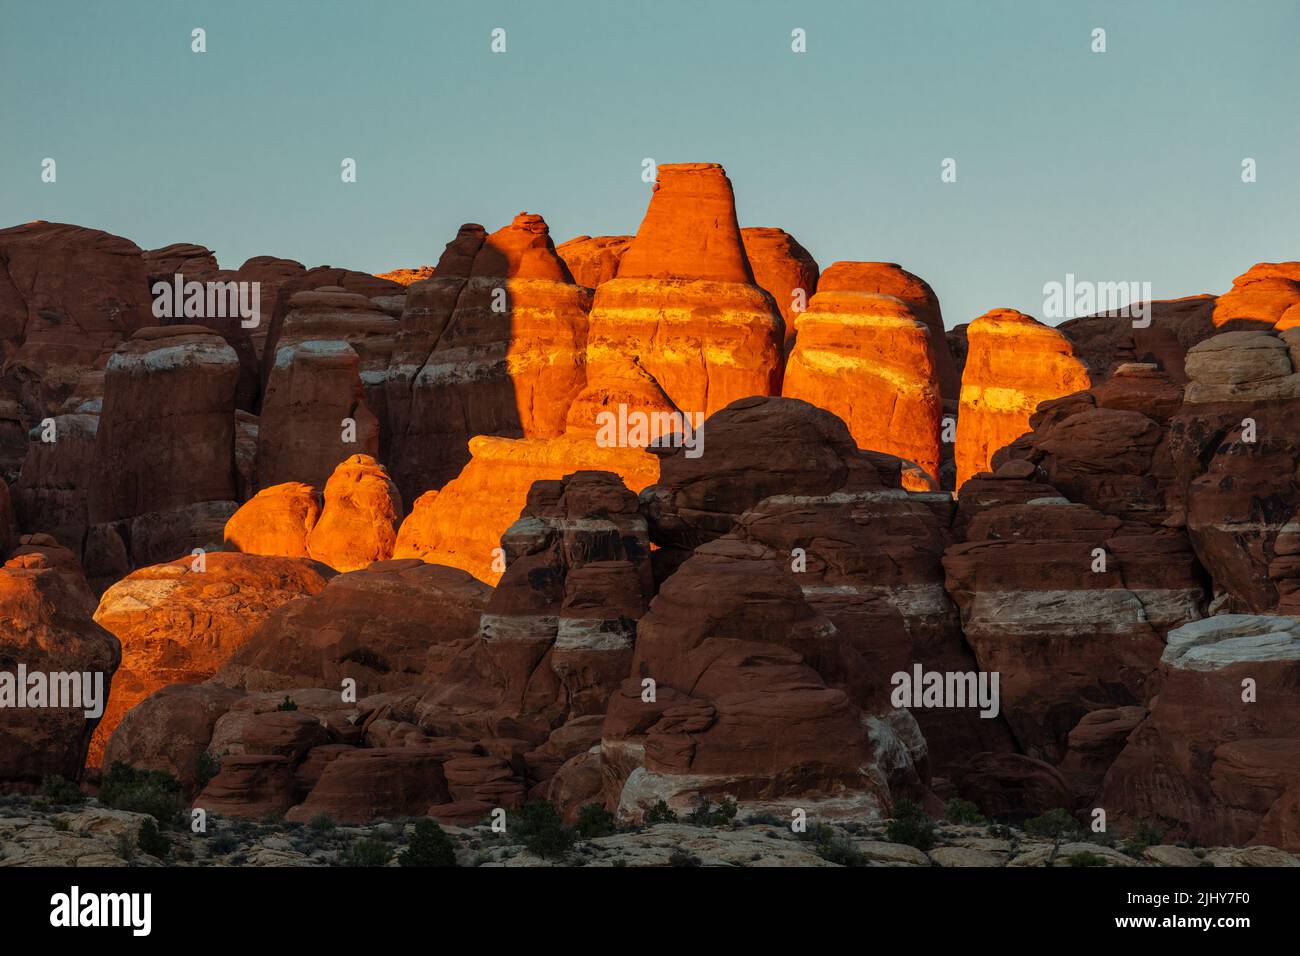 Sandstone formations at sunrise, Arches National Park, Utah Stock Photo